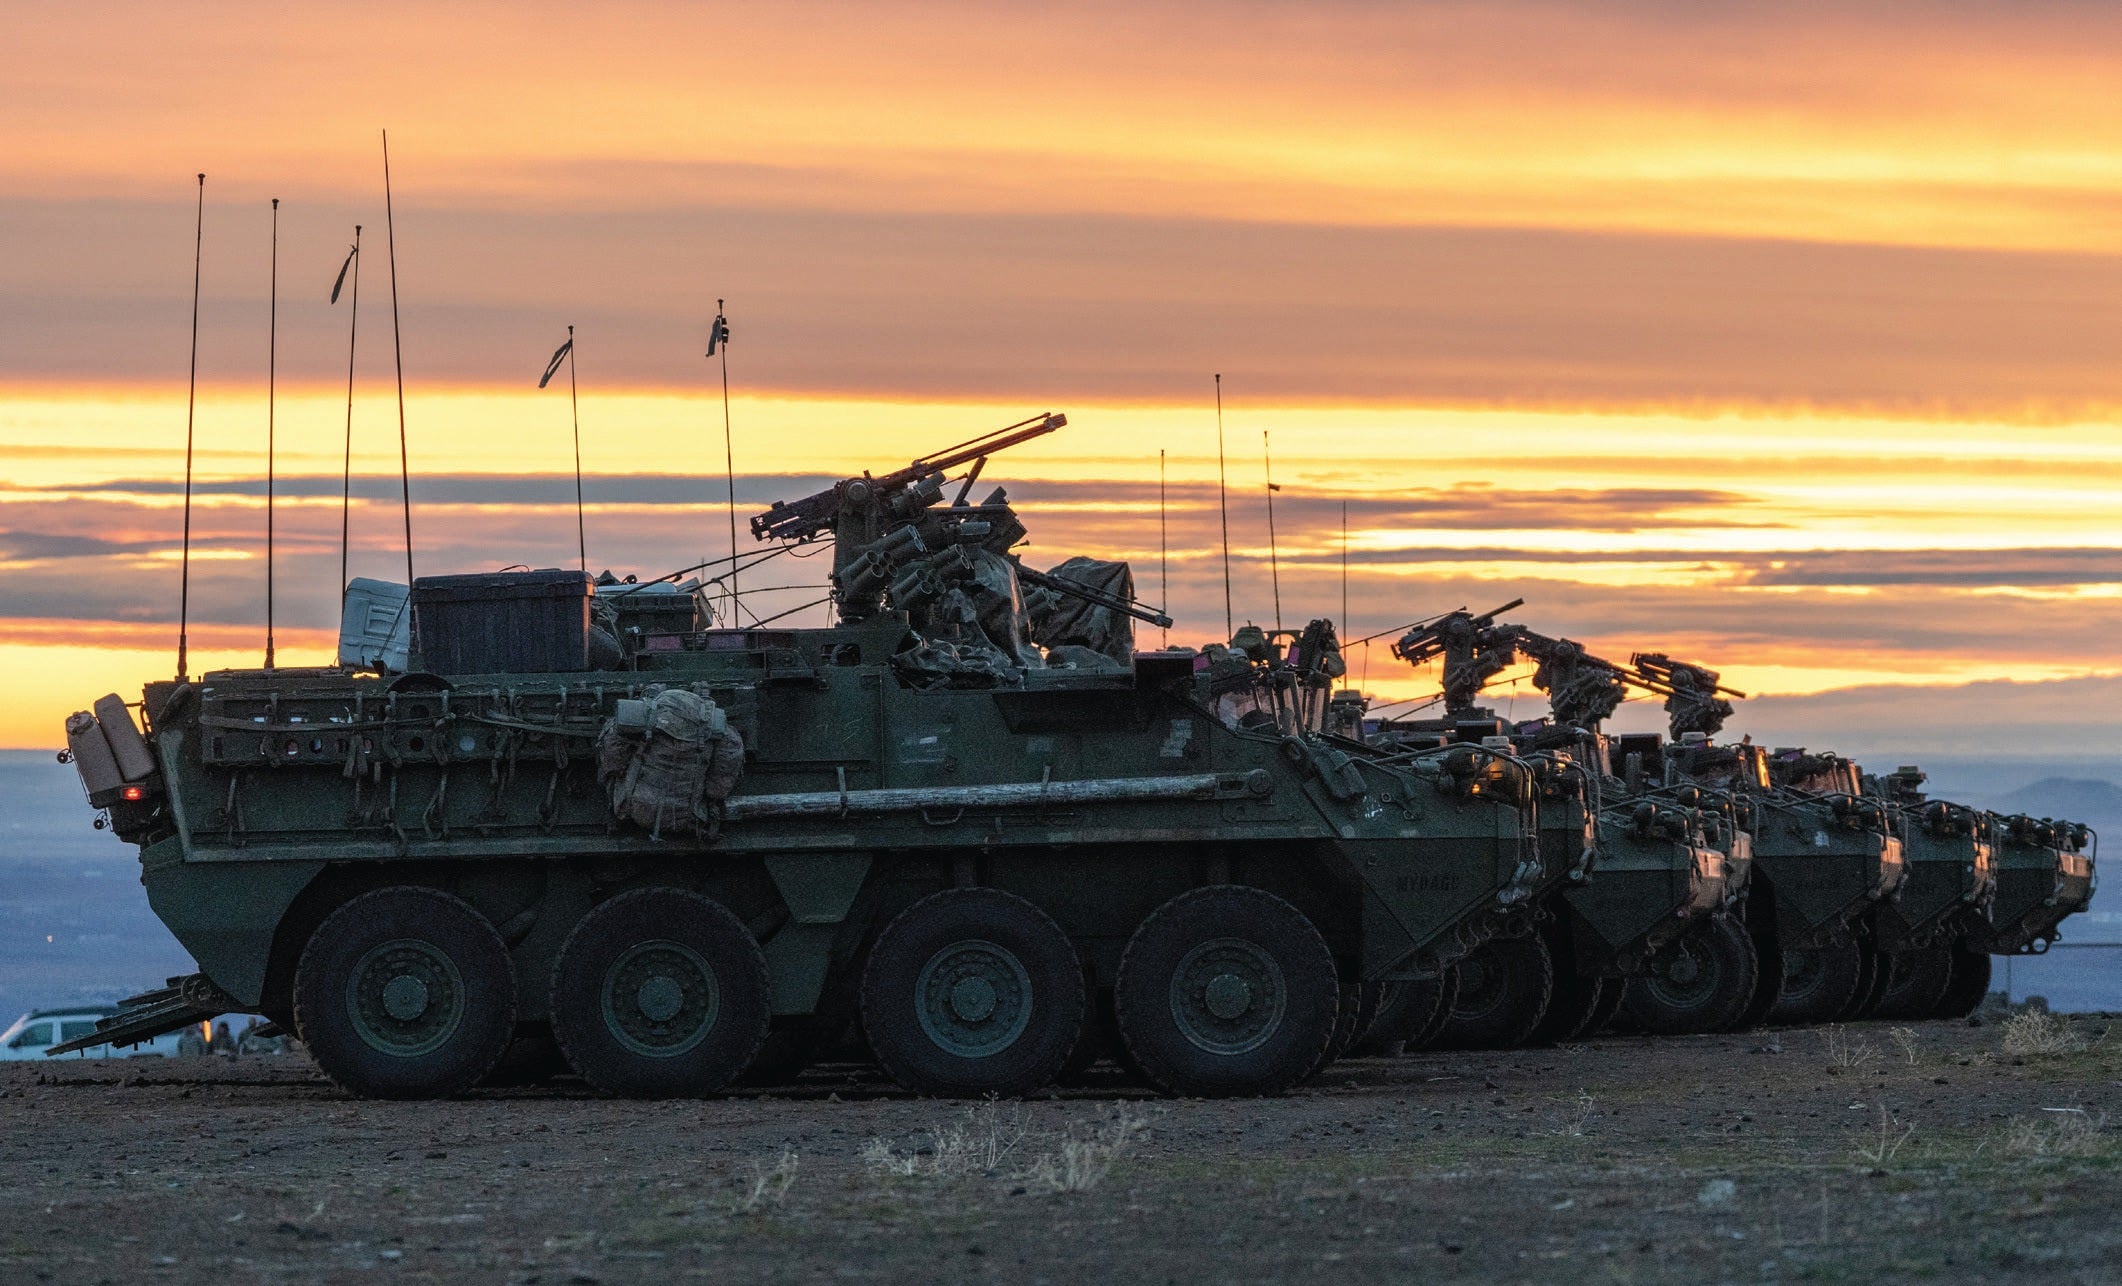 Stryker combat vehicles from the 2nd Brigade Combat Team, 2nd Infantry Division, are lined up before an exercise at Yakima Training Center, Washington. (Credit: U.S. Army/Capt. Cortland Henderson)